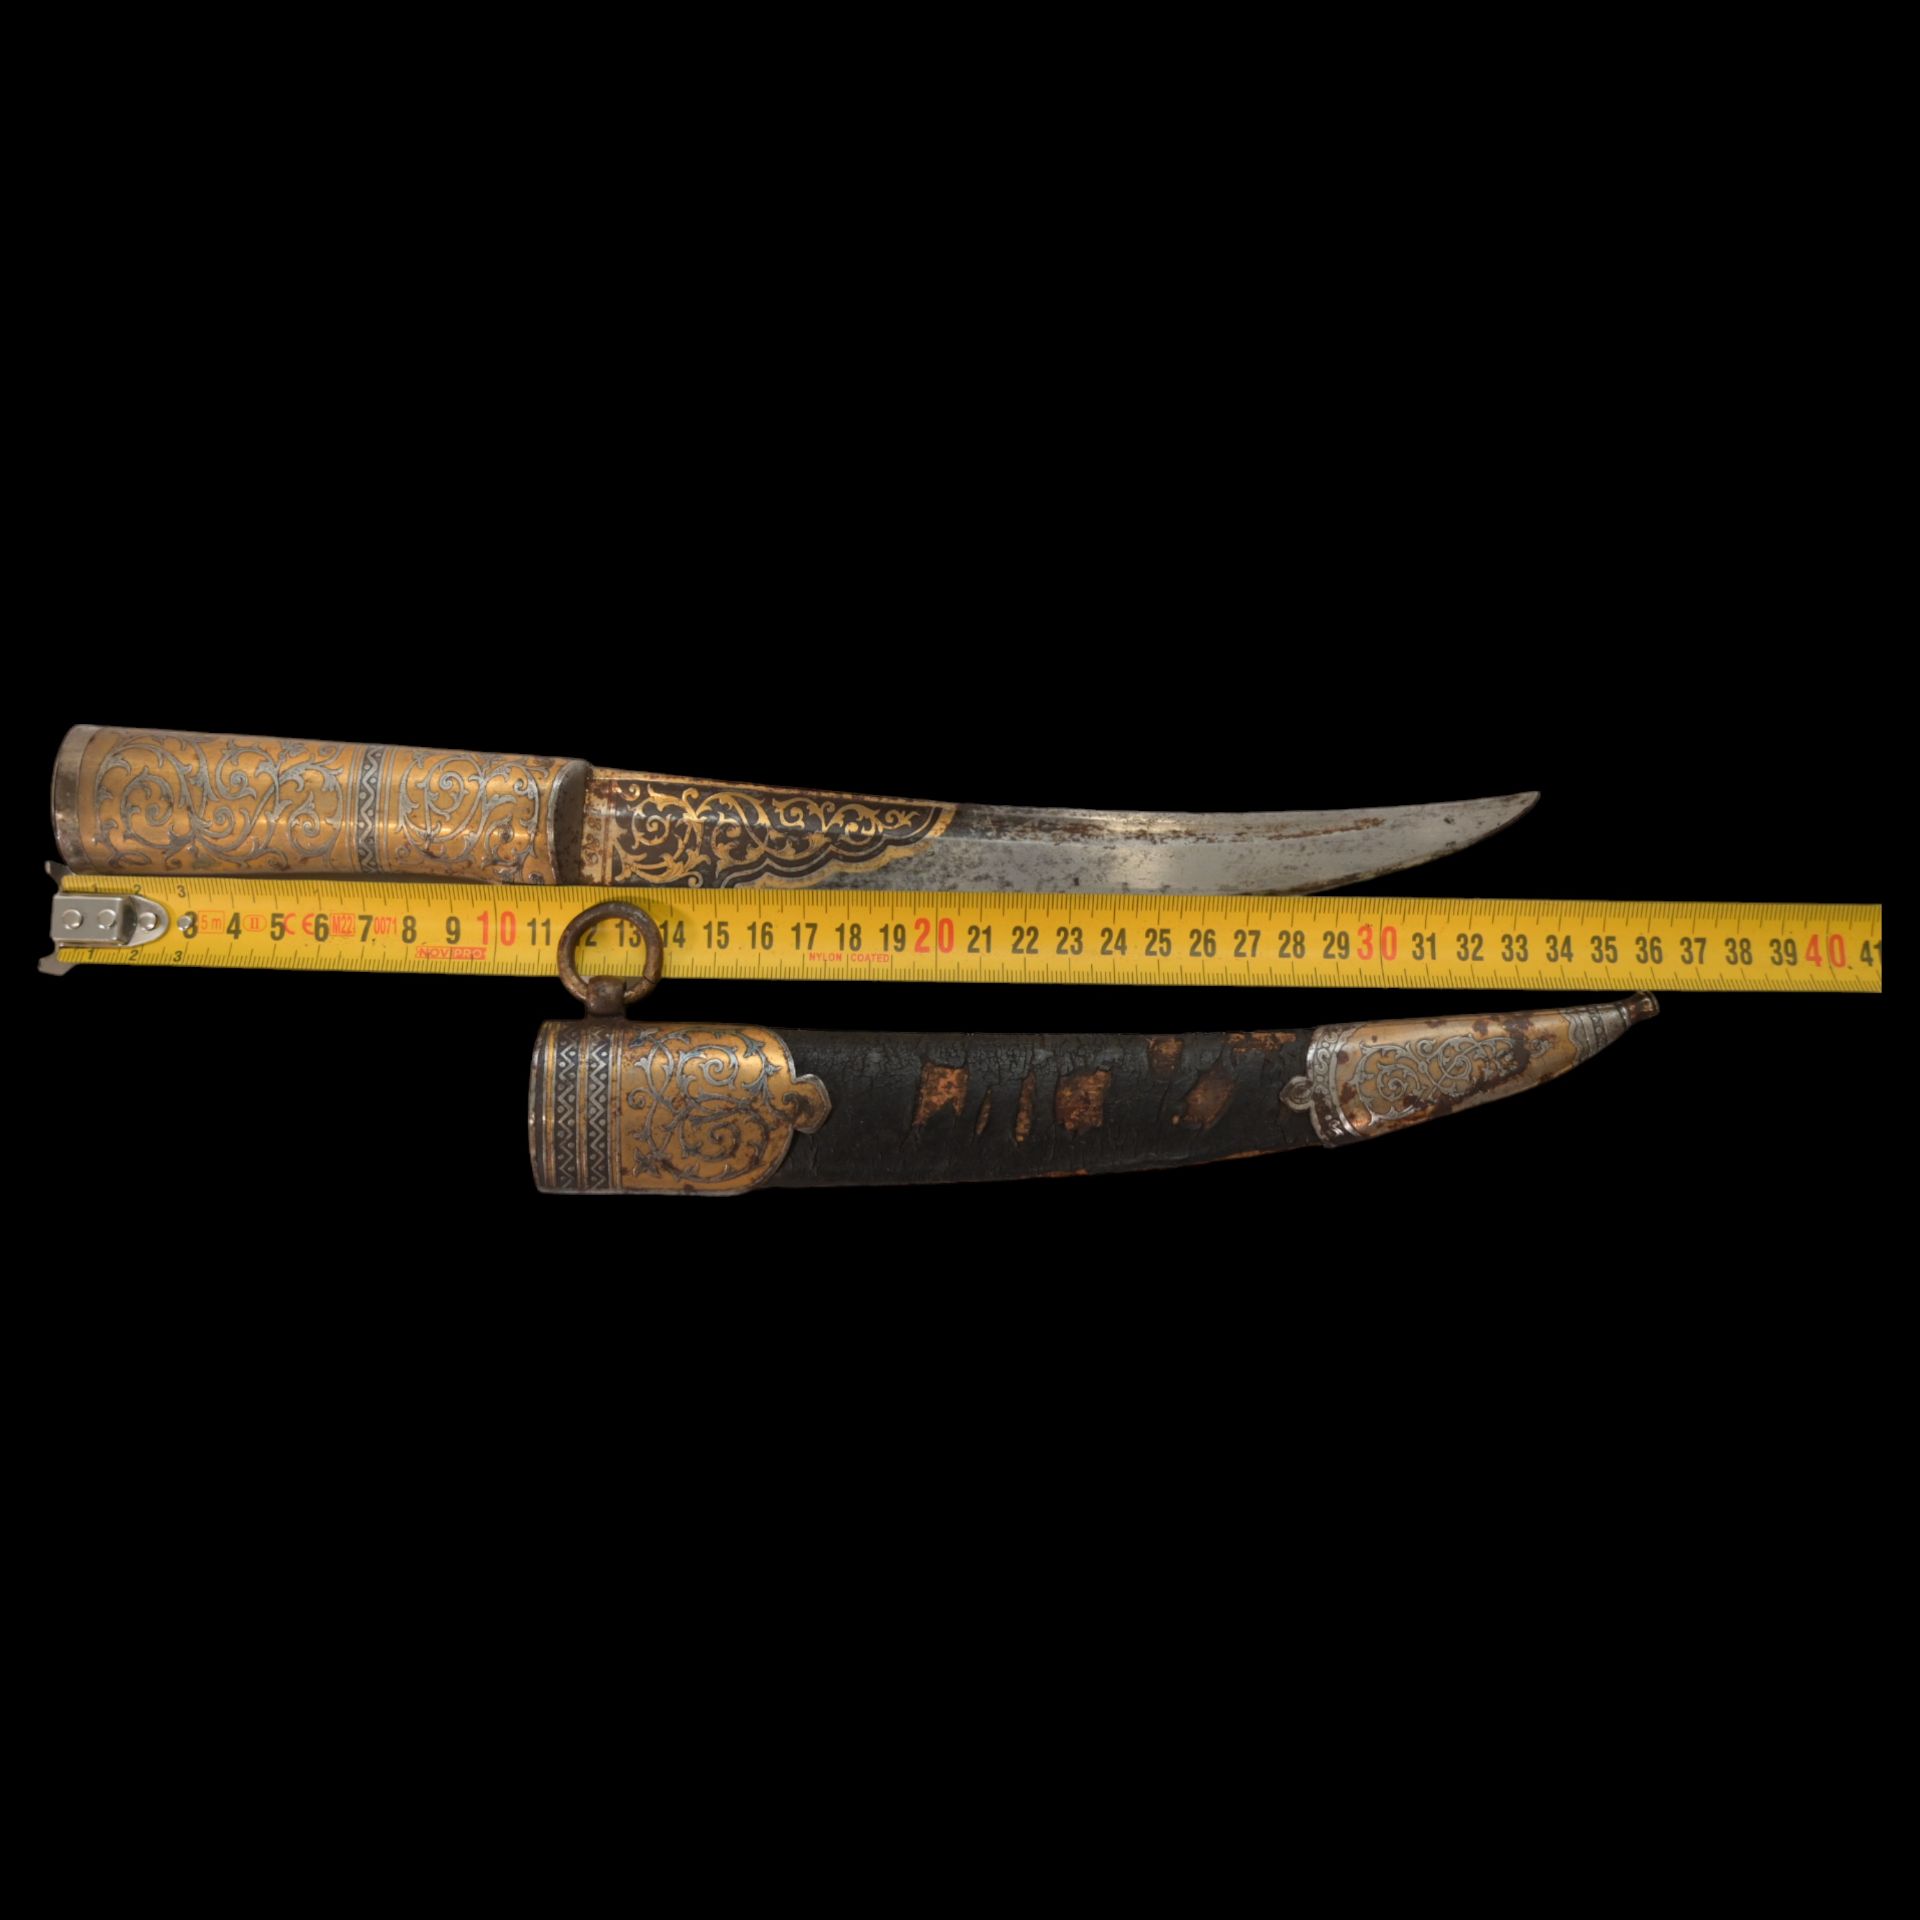 RARE HUNTING KNIFE, DECORATED WITH GOLD AND BLUE, RUSSIAN EMPIRE, ZLATOUST, 1889. - Image 16 of 26